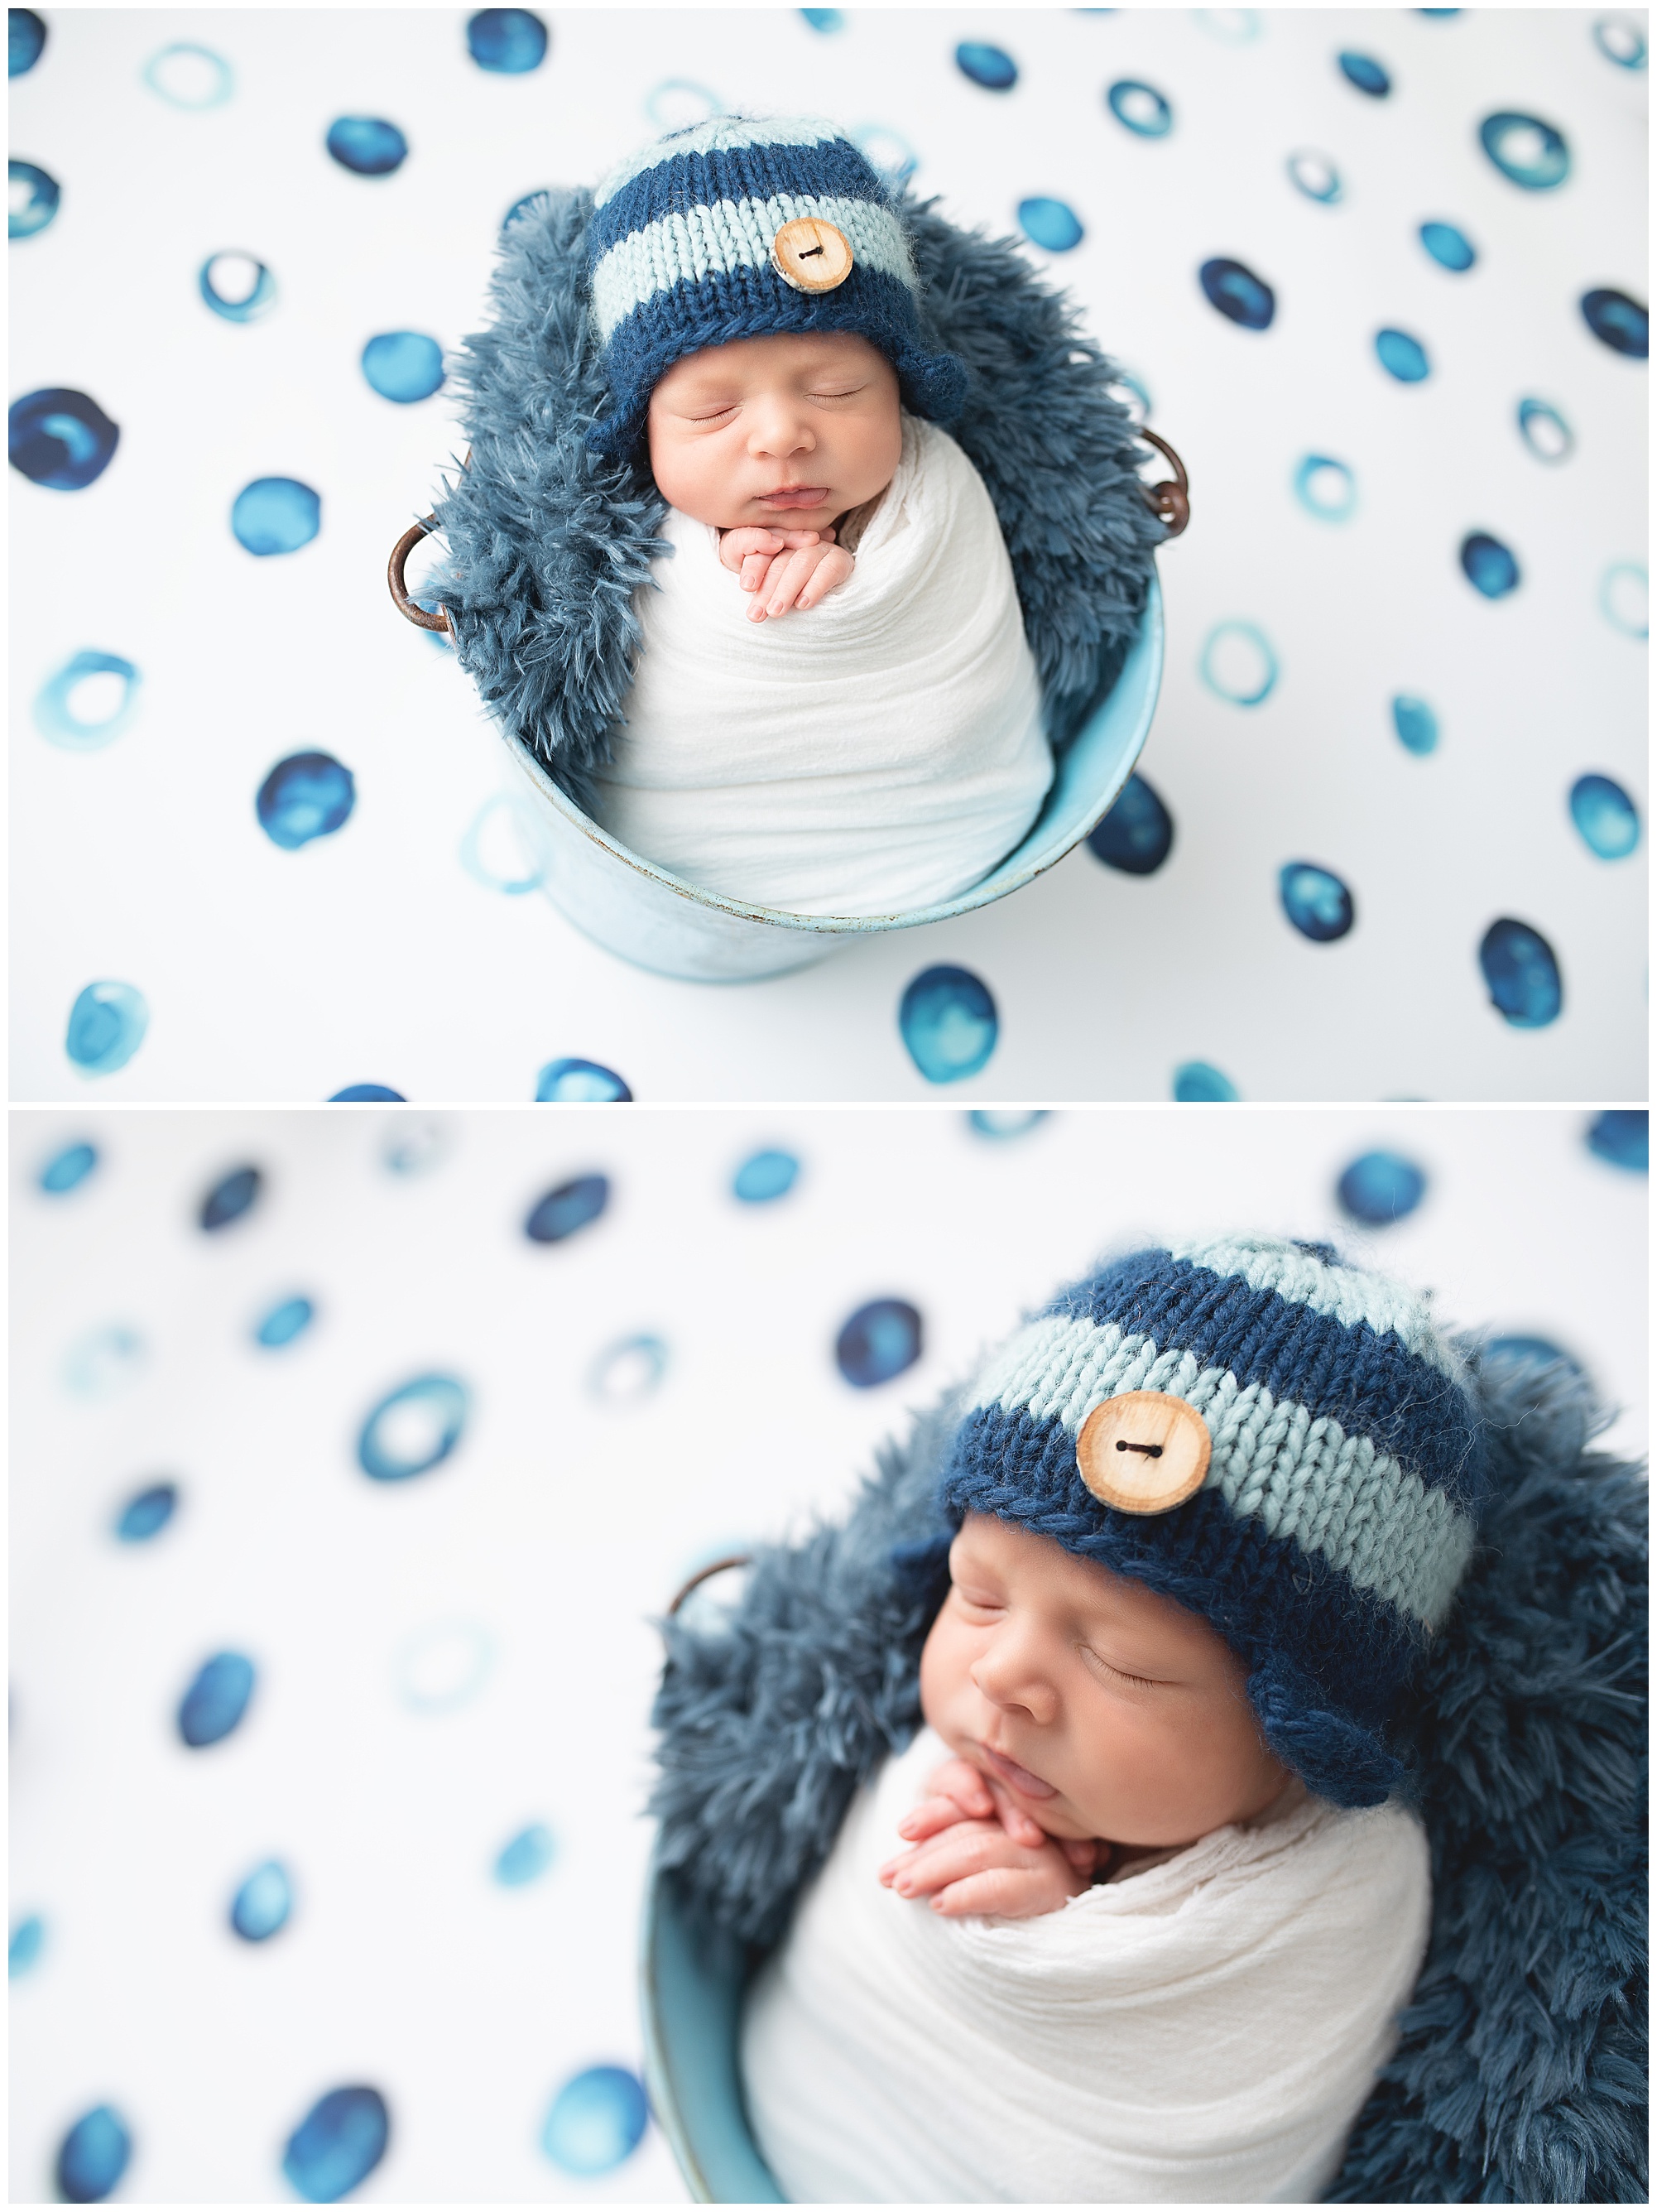 newborn boy laying in a blue bucket during his photo session